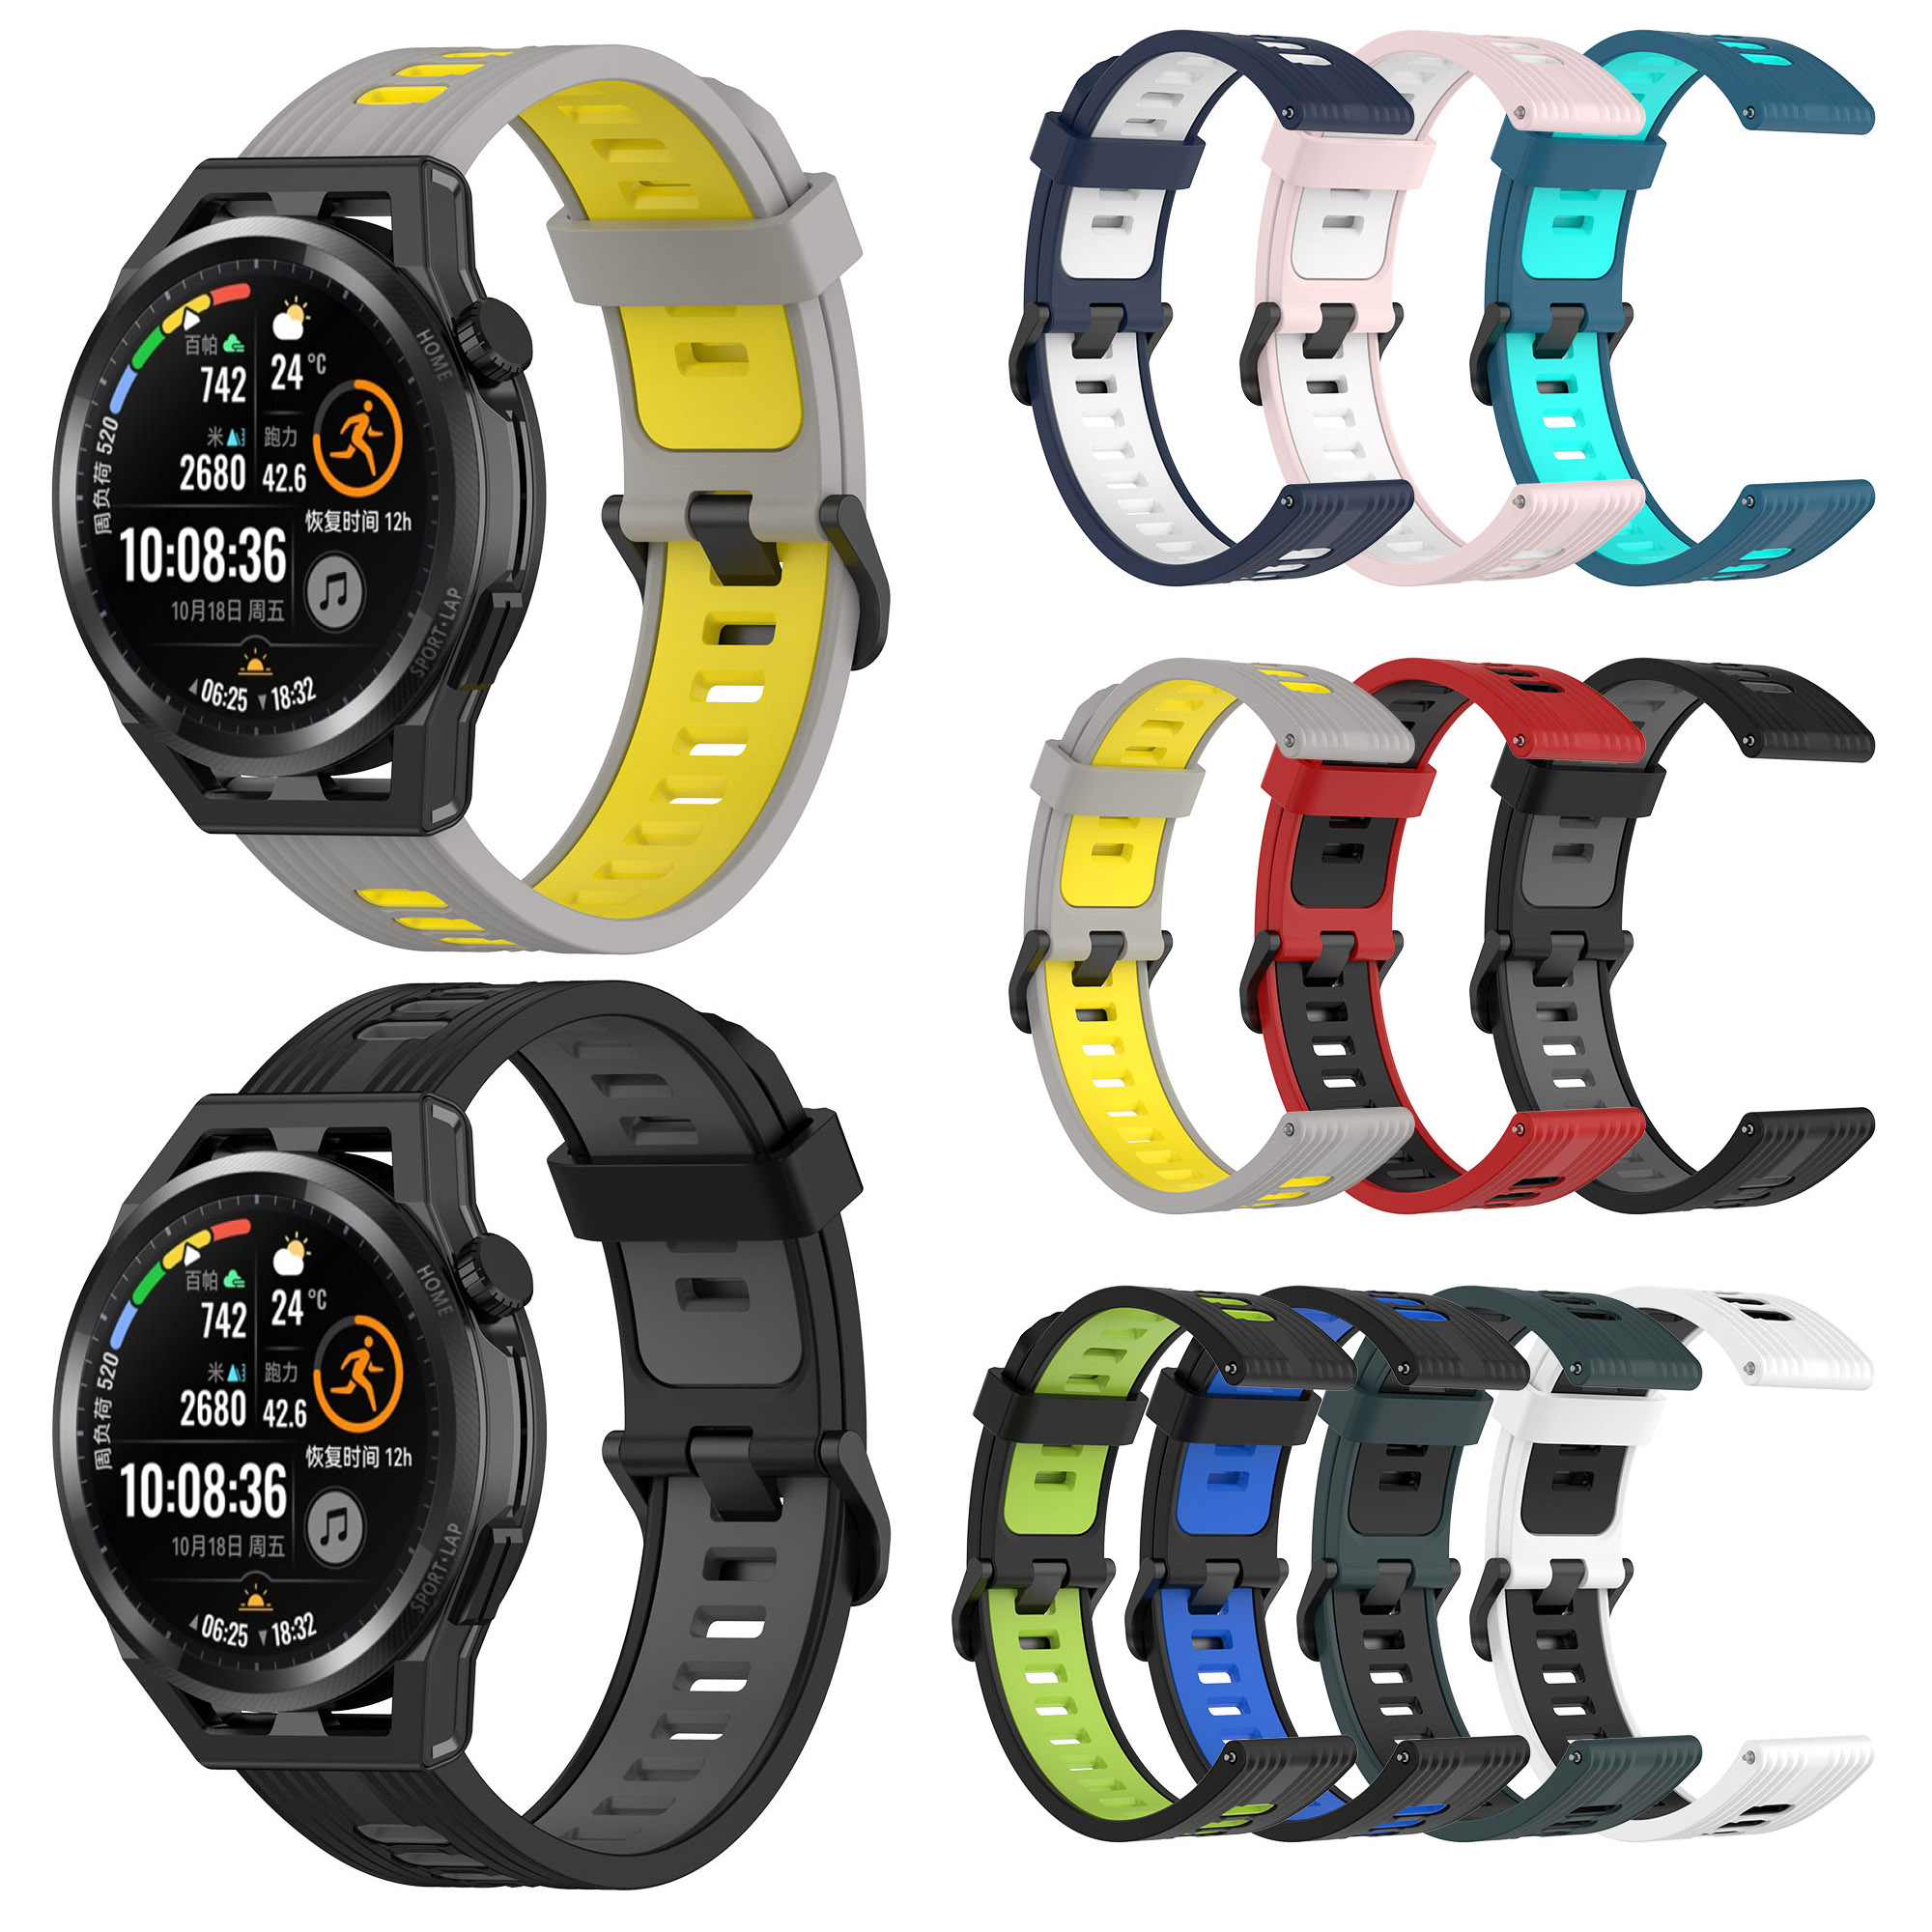 Bakeey 20/22mm Width Comfortable Breathable Sweat proof Soft Silicone Watch Band Strap Replacement for Huawei Watch GT Runner/ Huawei Watch GT3 1